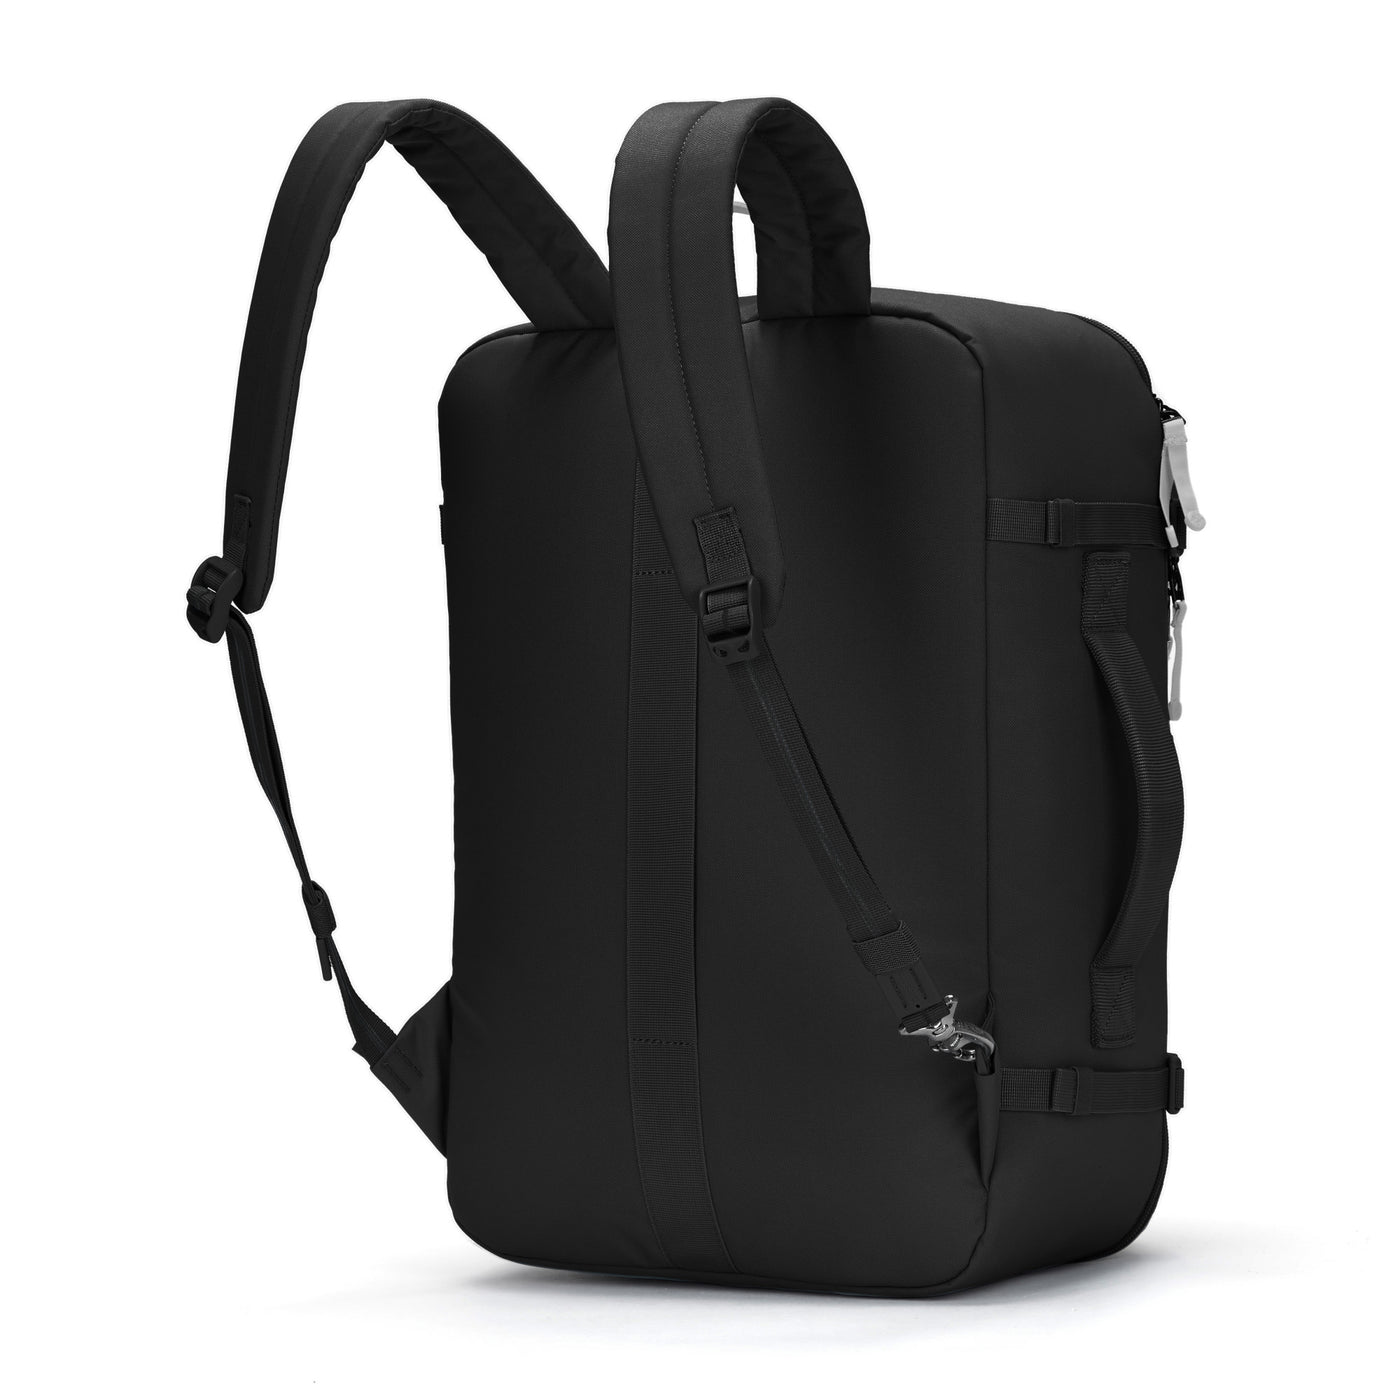 PacsafeGO 34L Carry-On Backpack